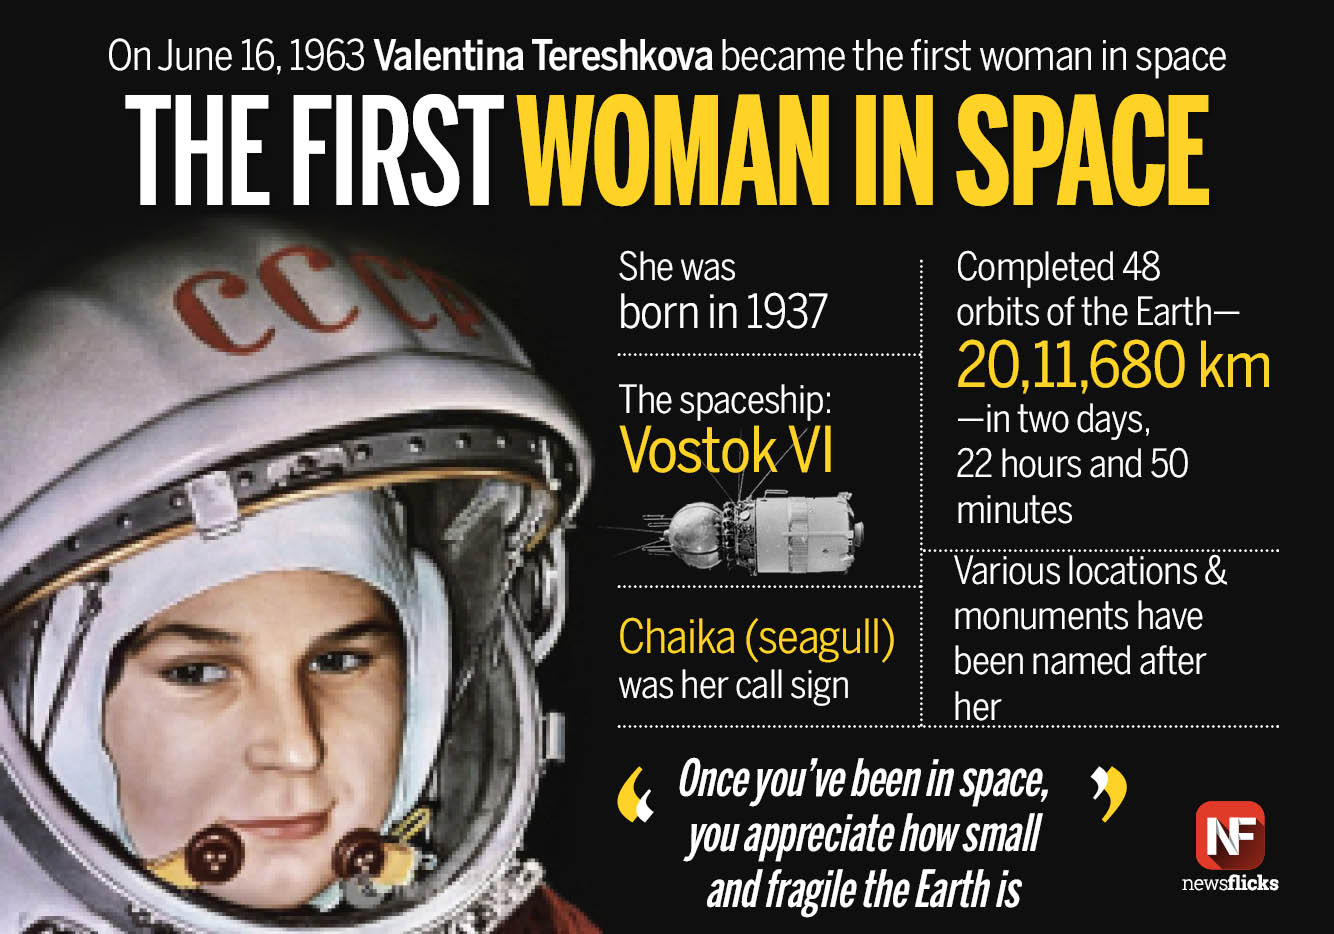 Newsflicks ar Twitter: "Russian astronaut Valentina Tereshkova became the first woman in space on June 16, 1963 https://t.co/QPUGz0T9wq" / Twitter